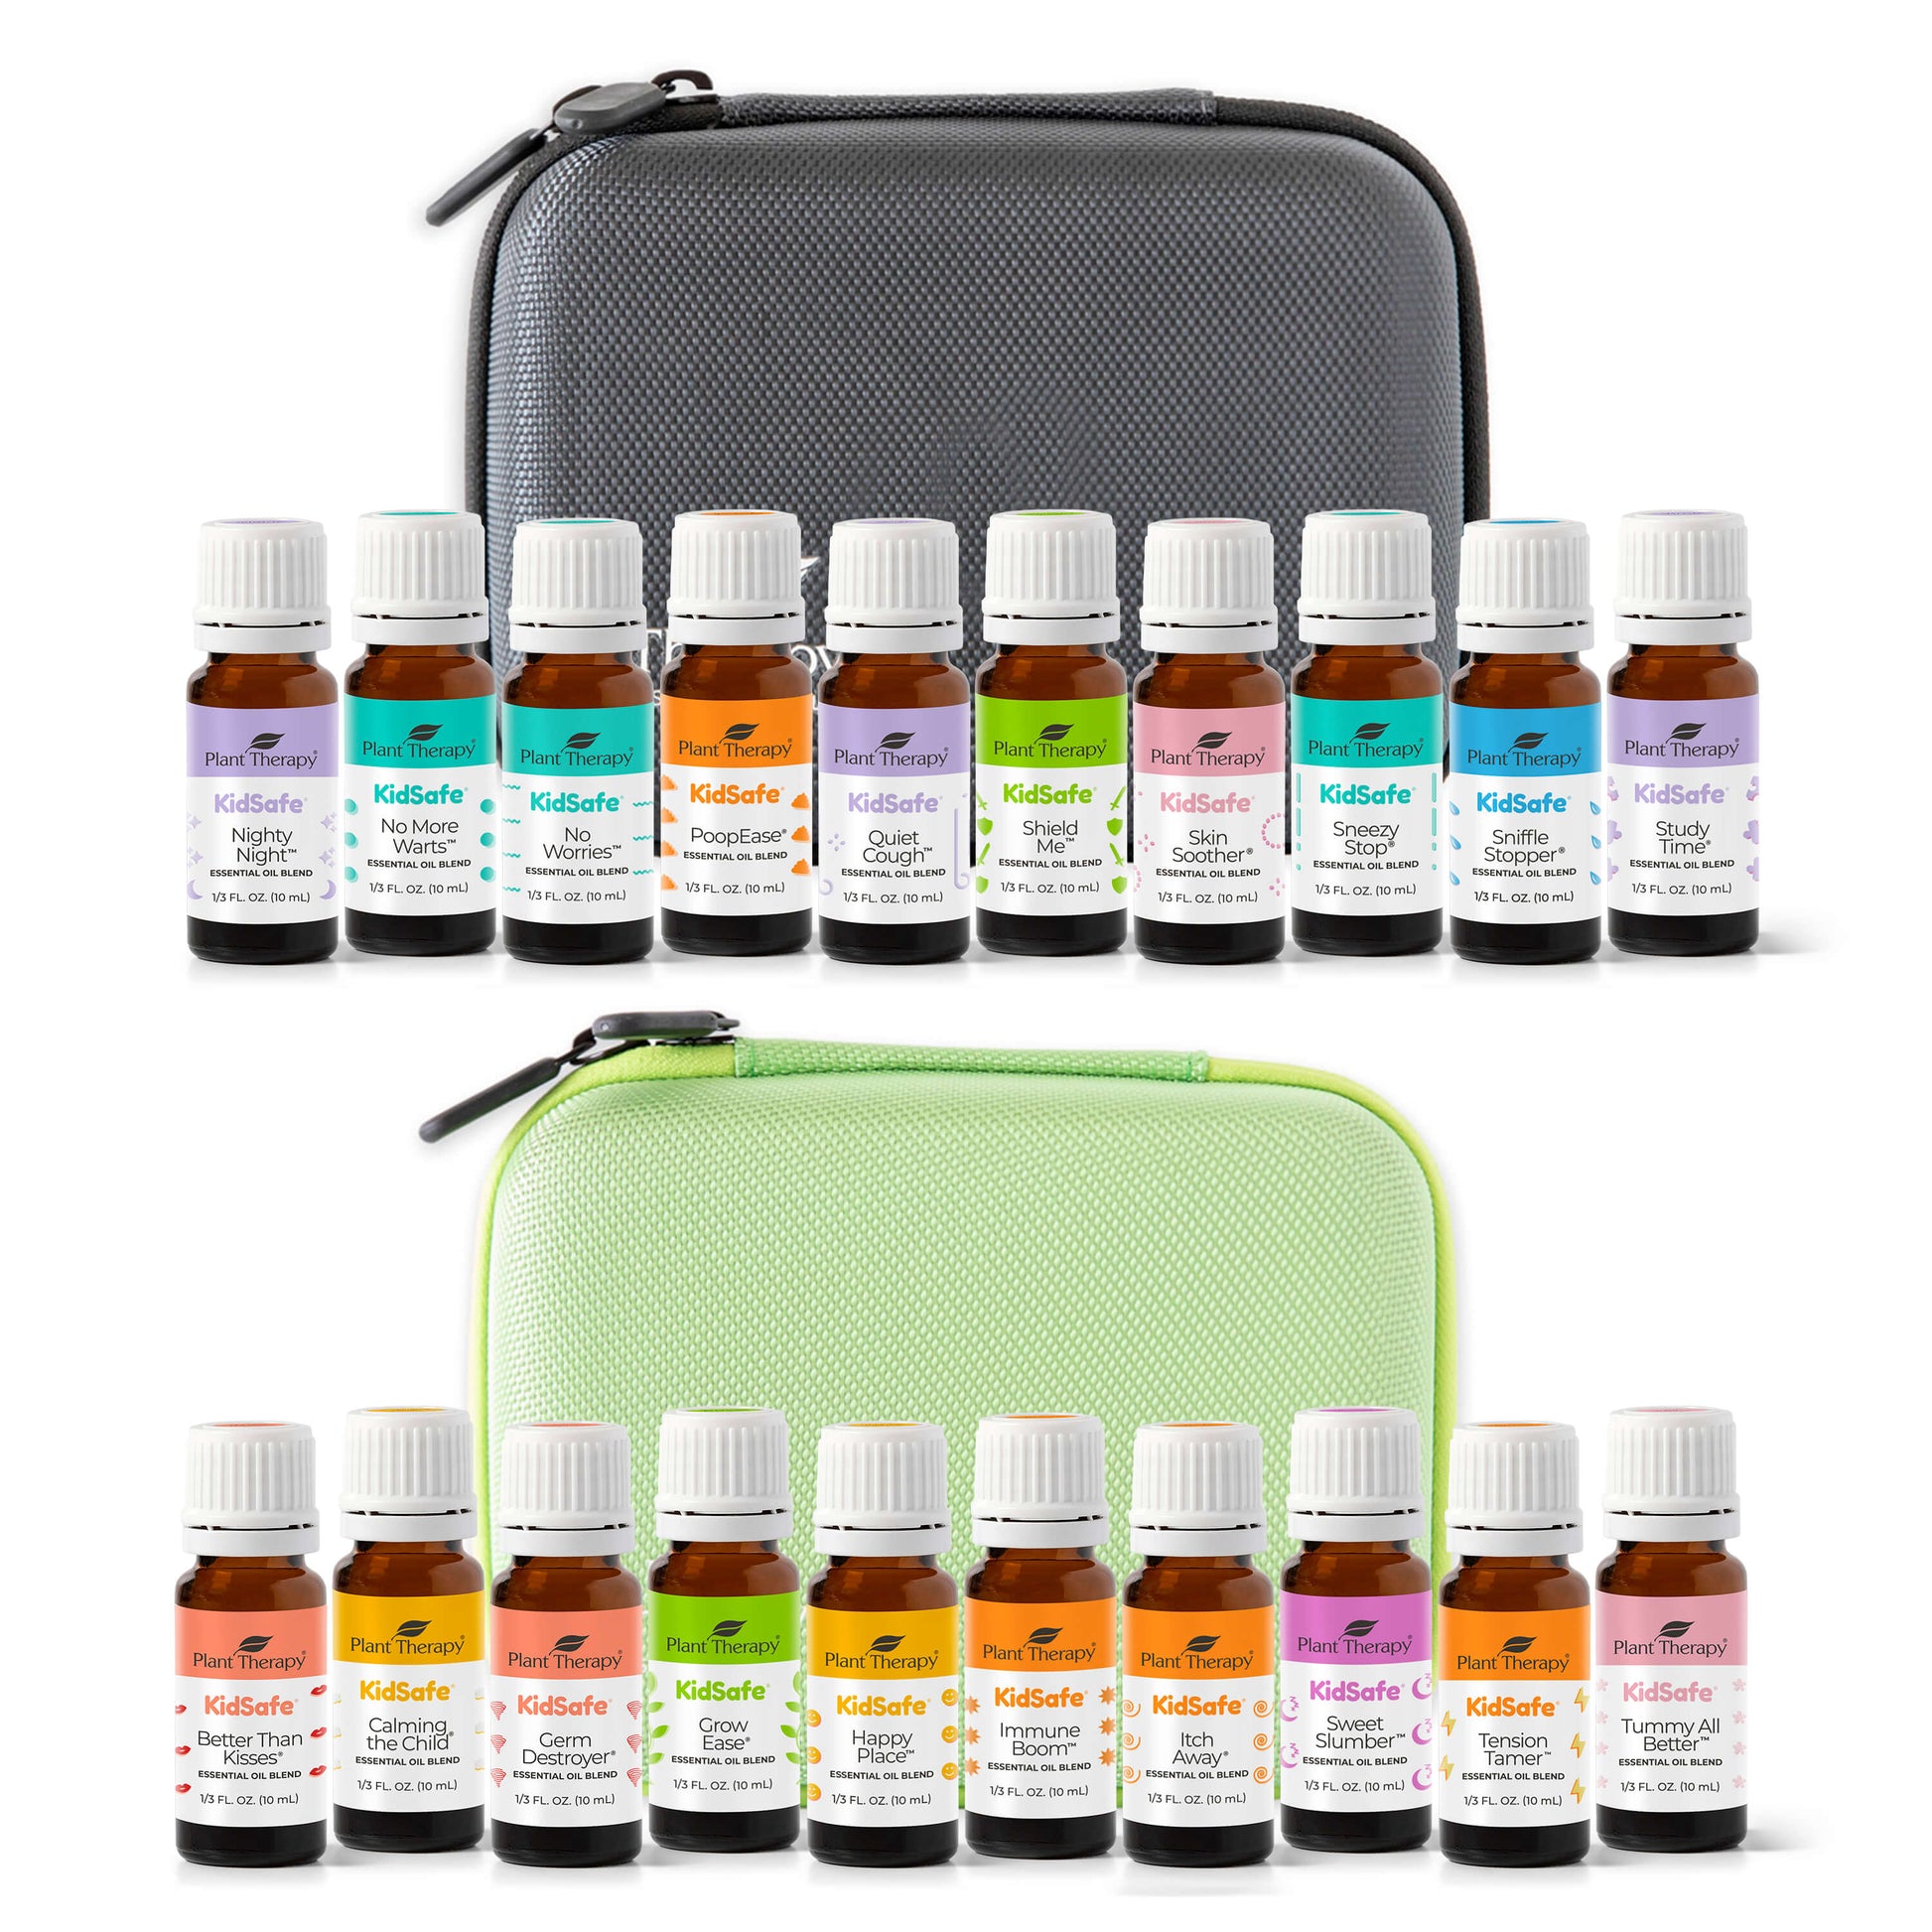 Best of the Best Essential Oil 3 Set